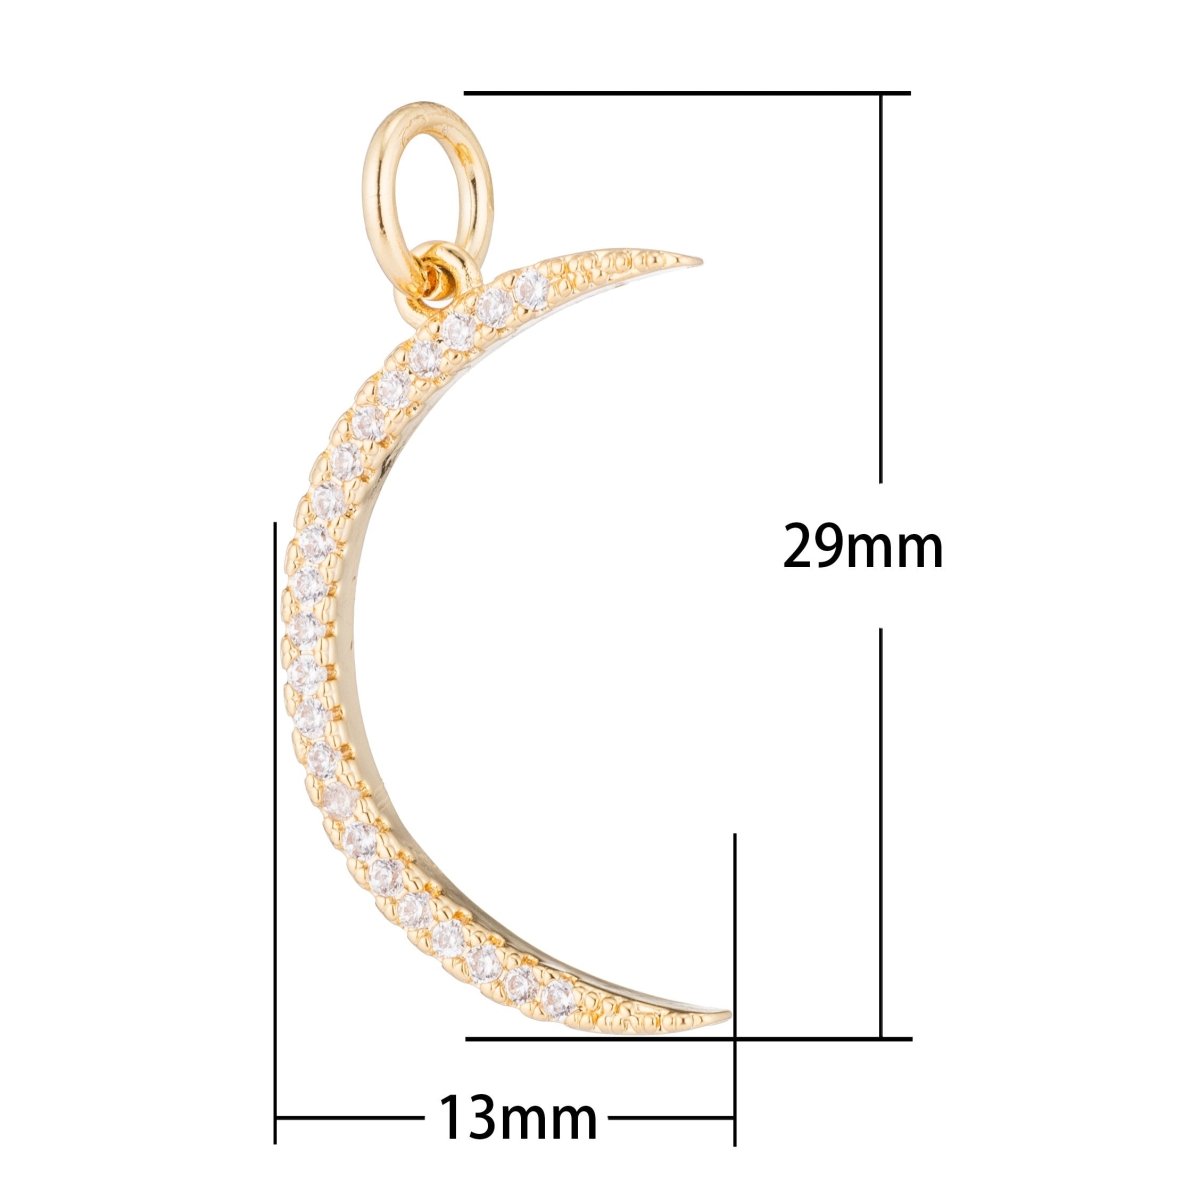 Gold Crescent Moon, Celestial, Wish, Cute Dream Sky Cubic Zirconia Bracelet Necklace Pendant Charm Bead Bails Finding for Jewelry Making H-203 - DLUXCA